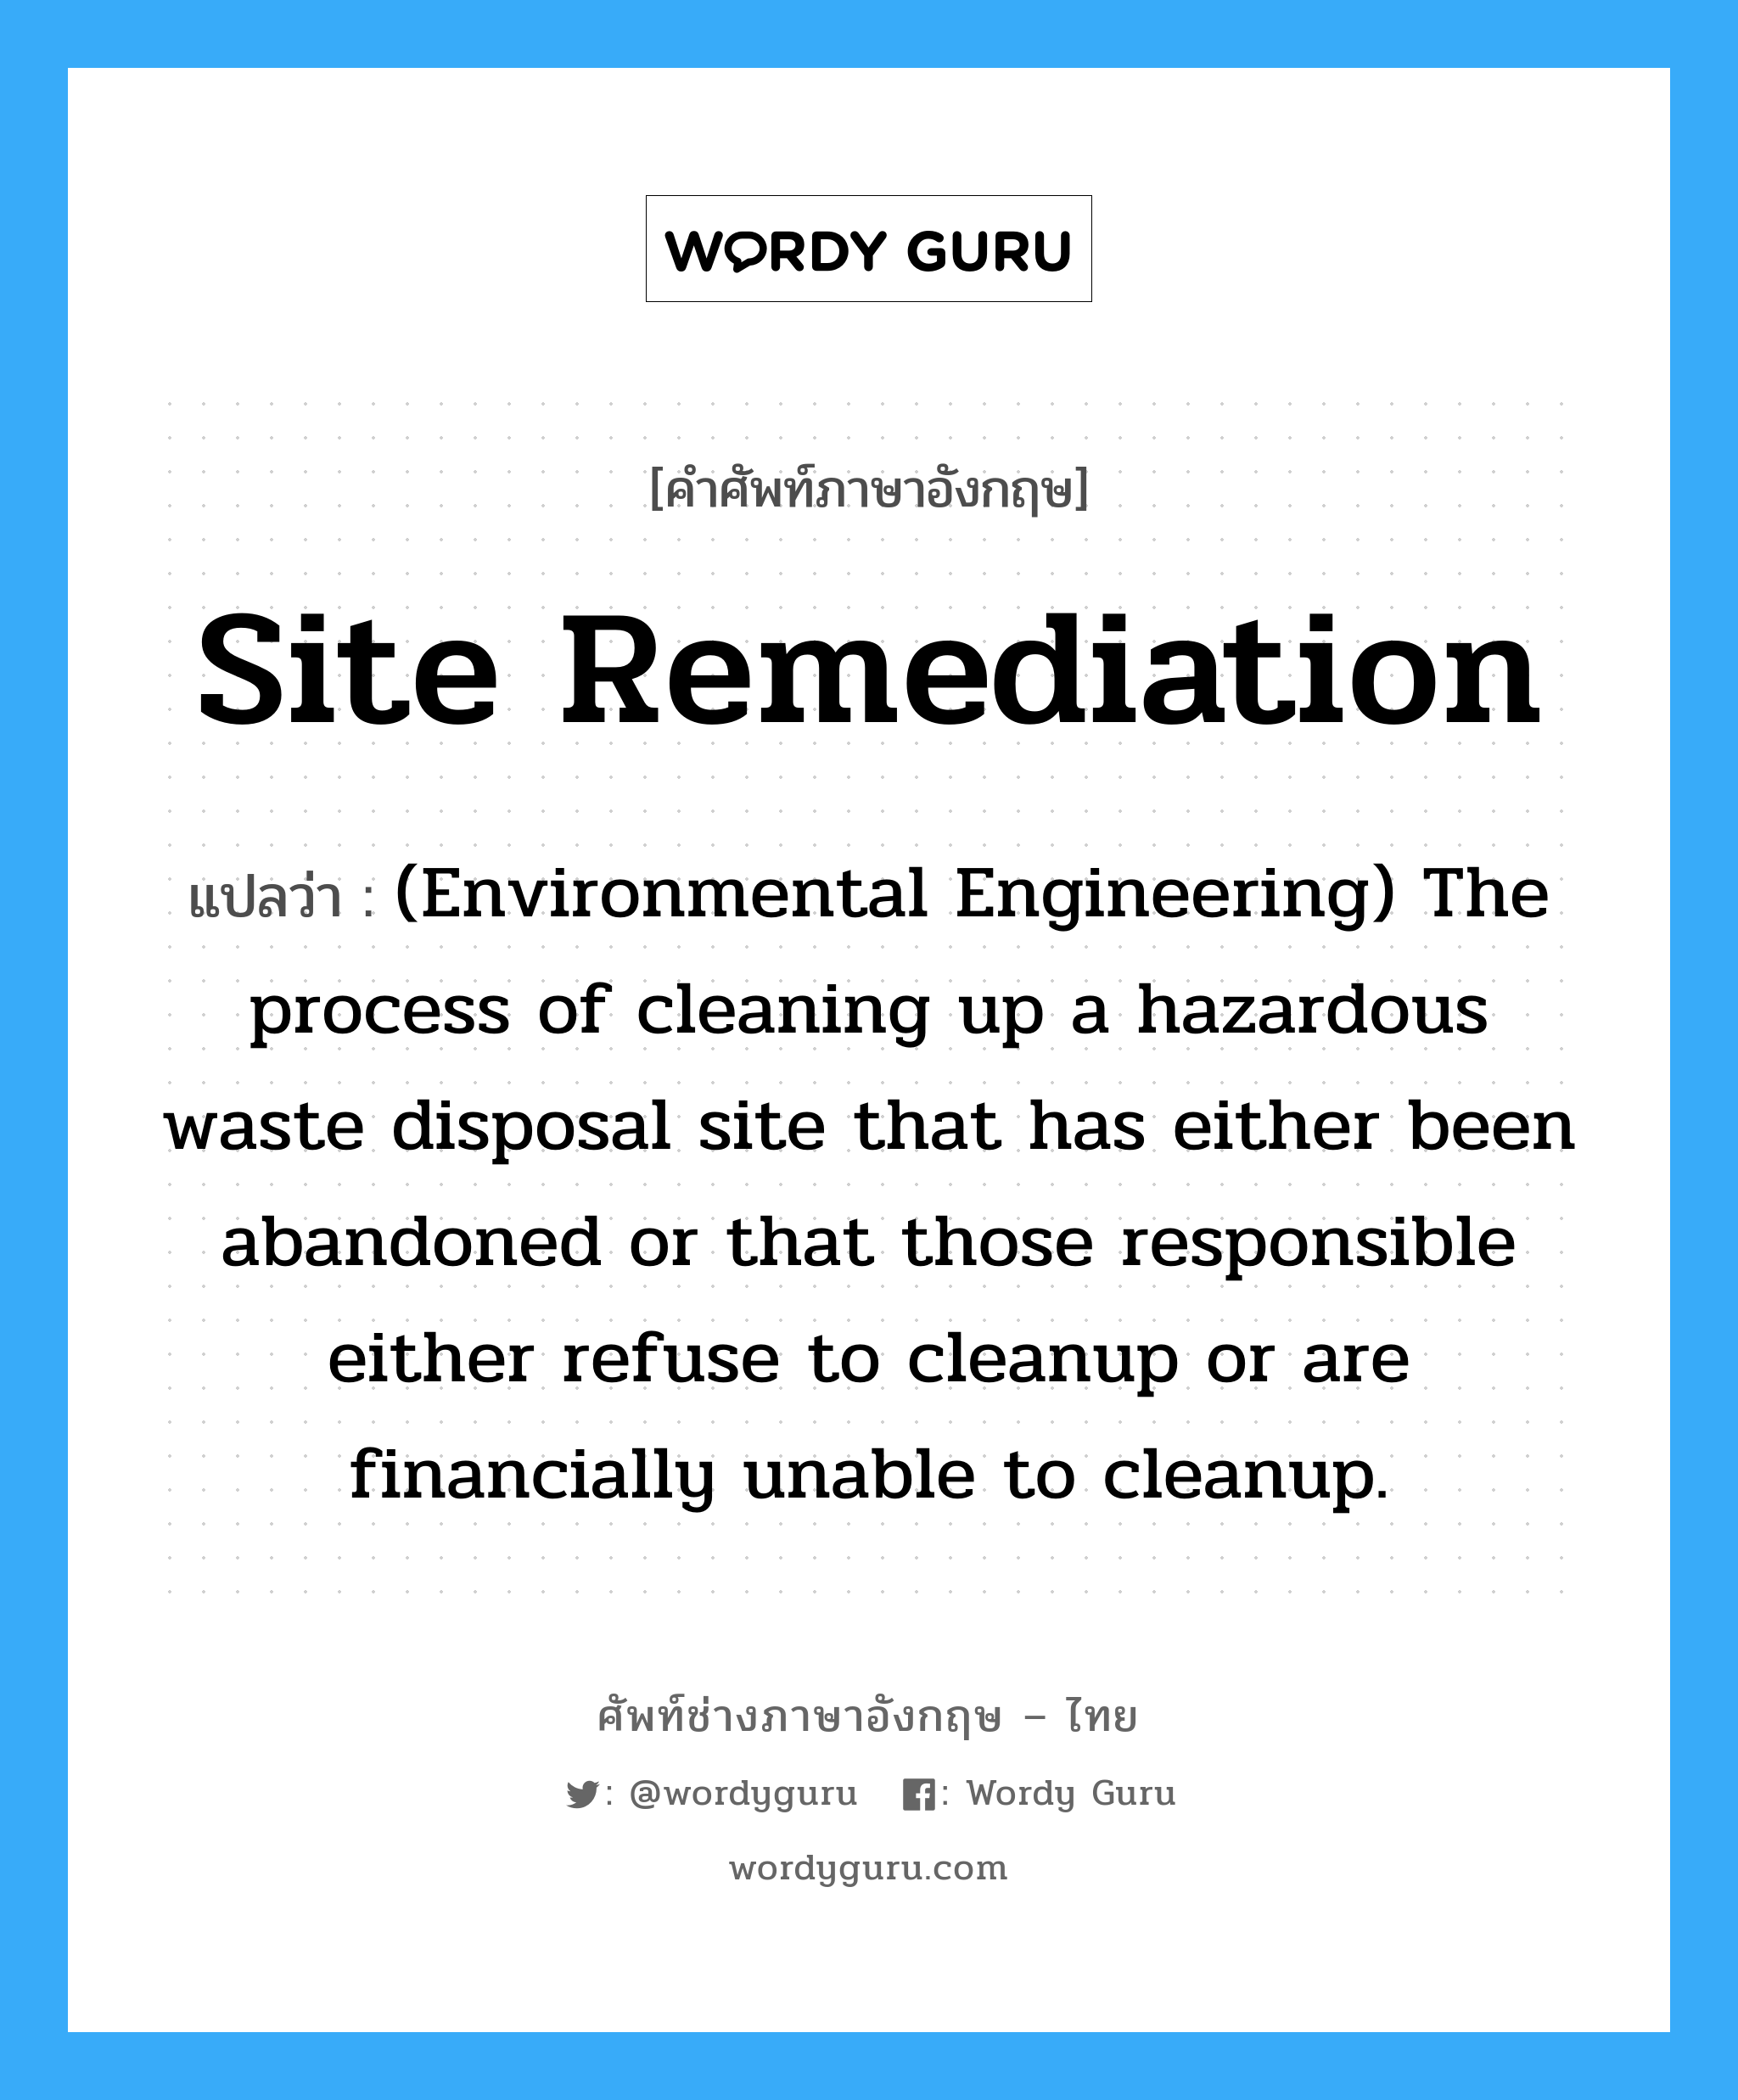 Site remediation แปลว่า?, คำศัพท์ช่างภาษาอังกฤษ - ไทย Site remediation คำศัพท์ภาษาอังกฤษ Site remediation แปลว่า (Environmental Engineering) The process of cleaning up a hazardous waste disposal site that has either been abandoned or that those responsible either refuse to cleanup or are financially unable to cleanup.